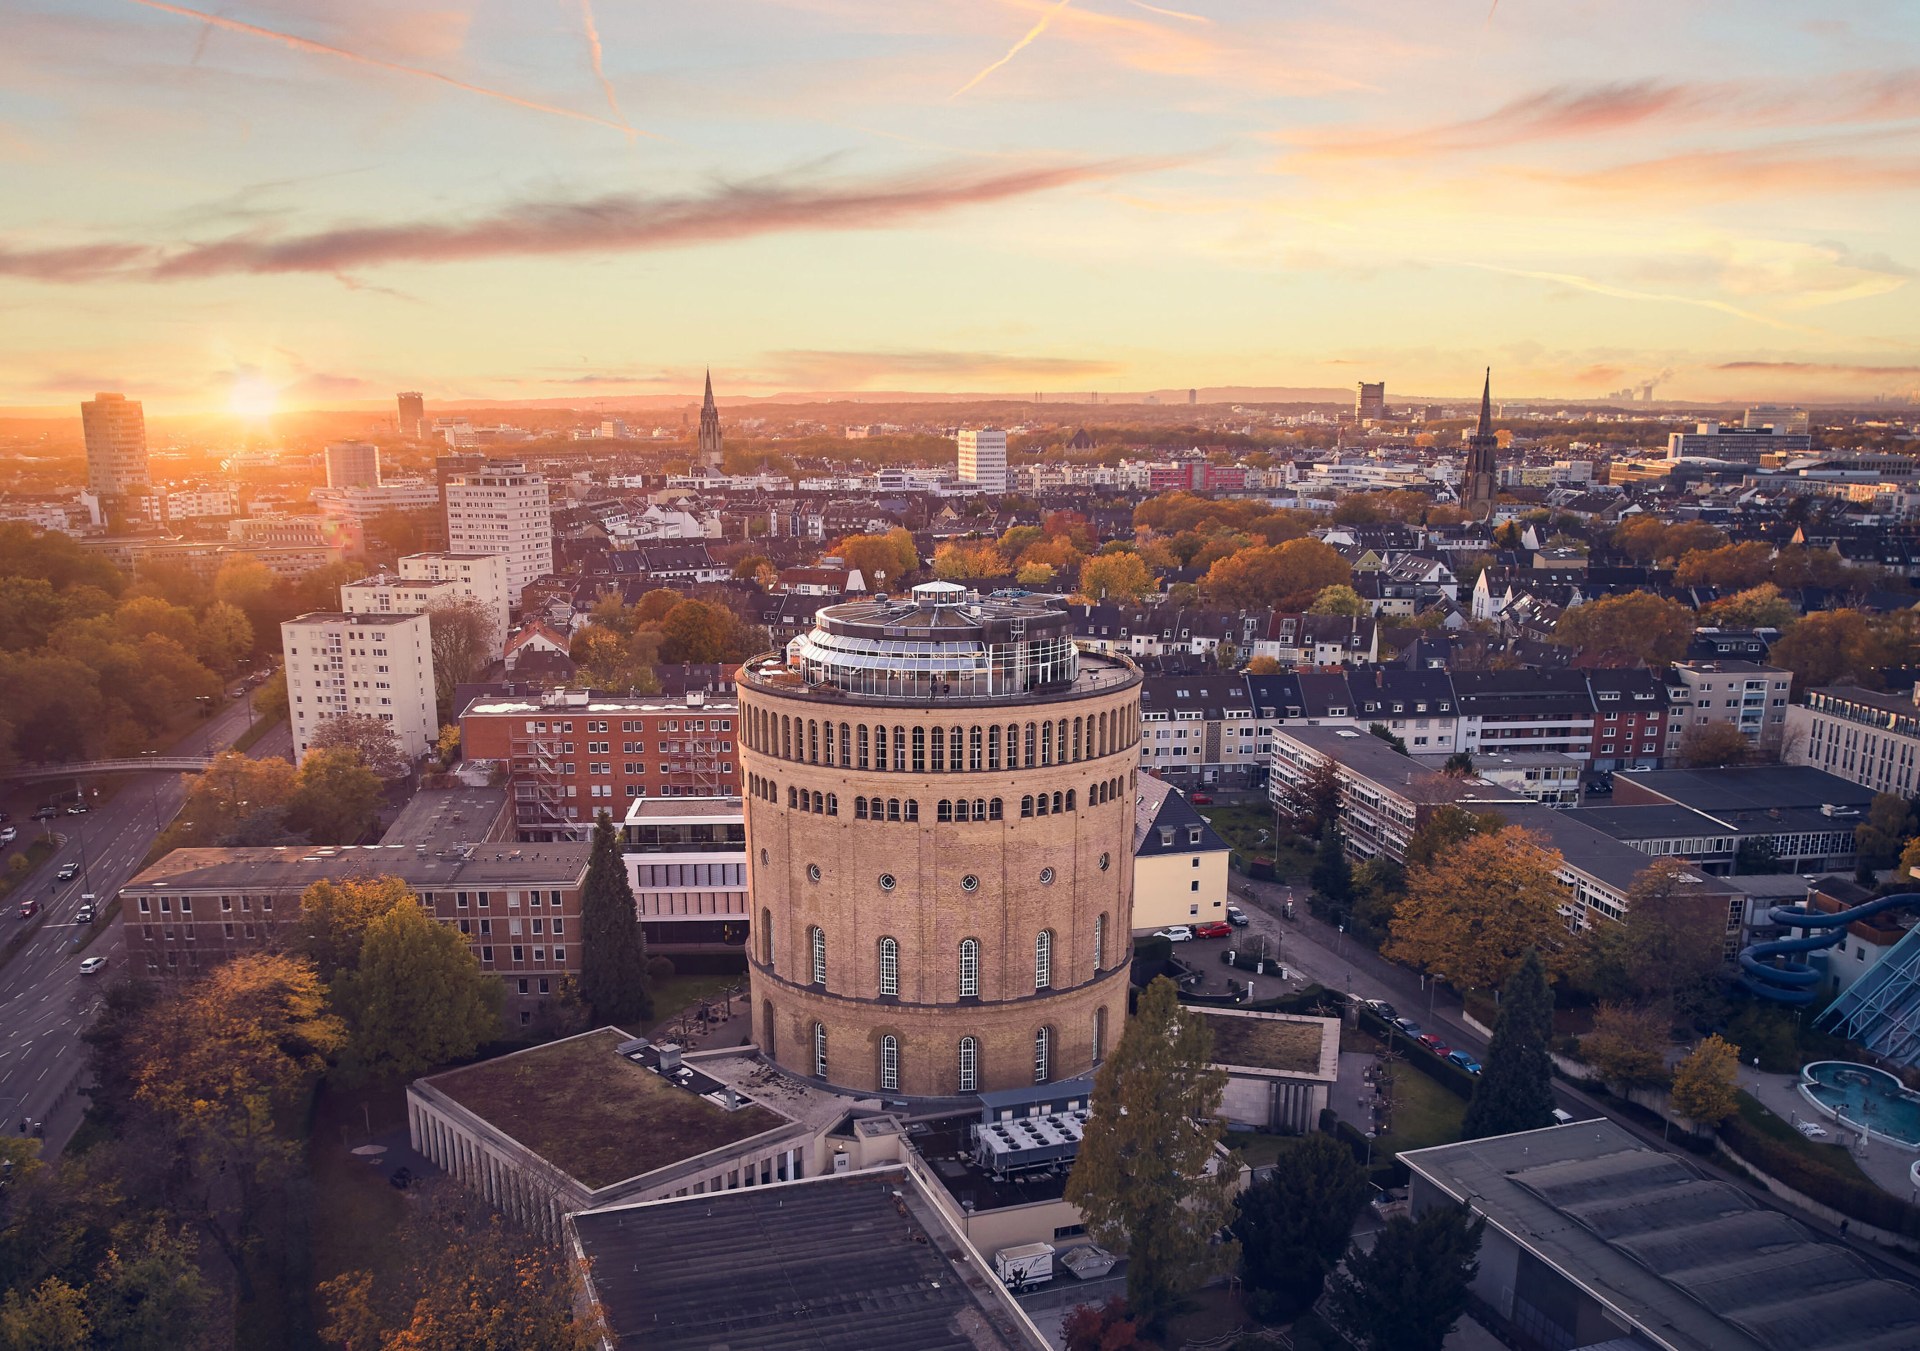 Wasserturm Hotel Cologne, Curio Collection by Hilton - Exterior Aerial